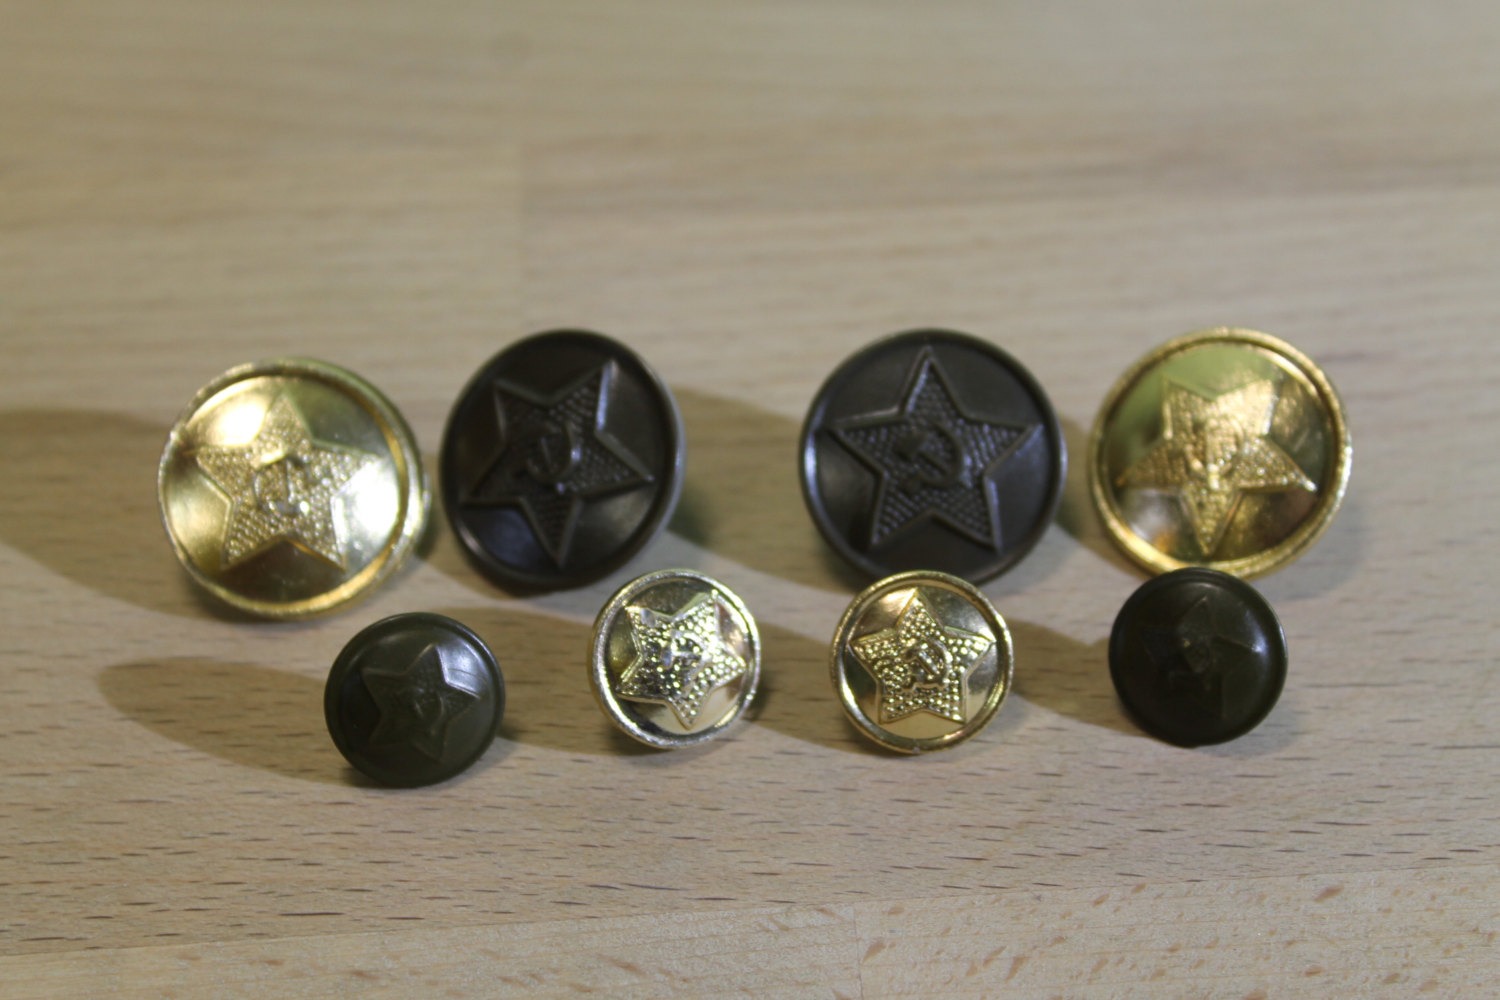 Set of 8 Vintage Soviet Army Buttons ... steampunk supplies ... button steampunk buy now online